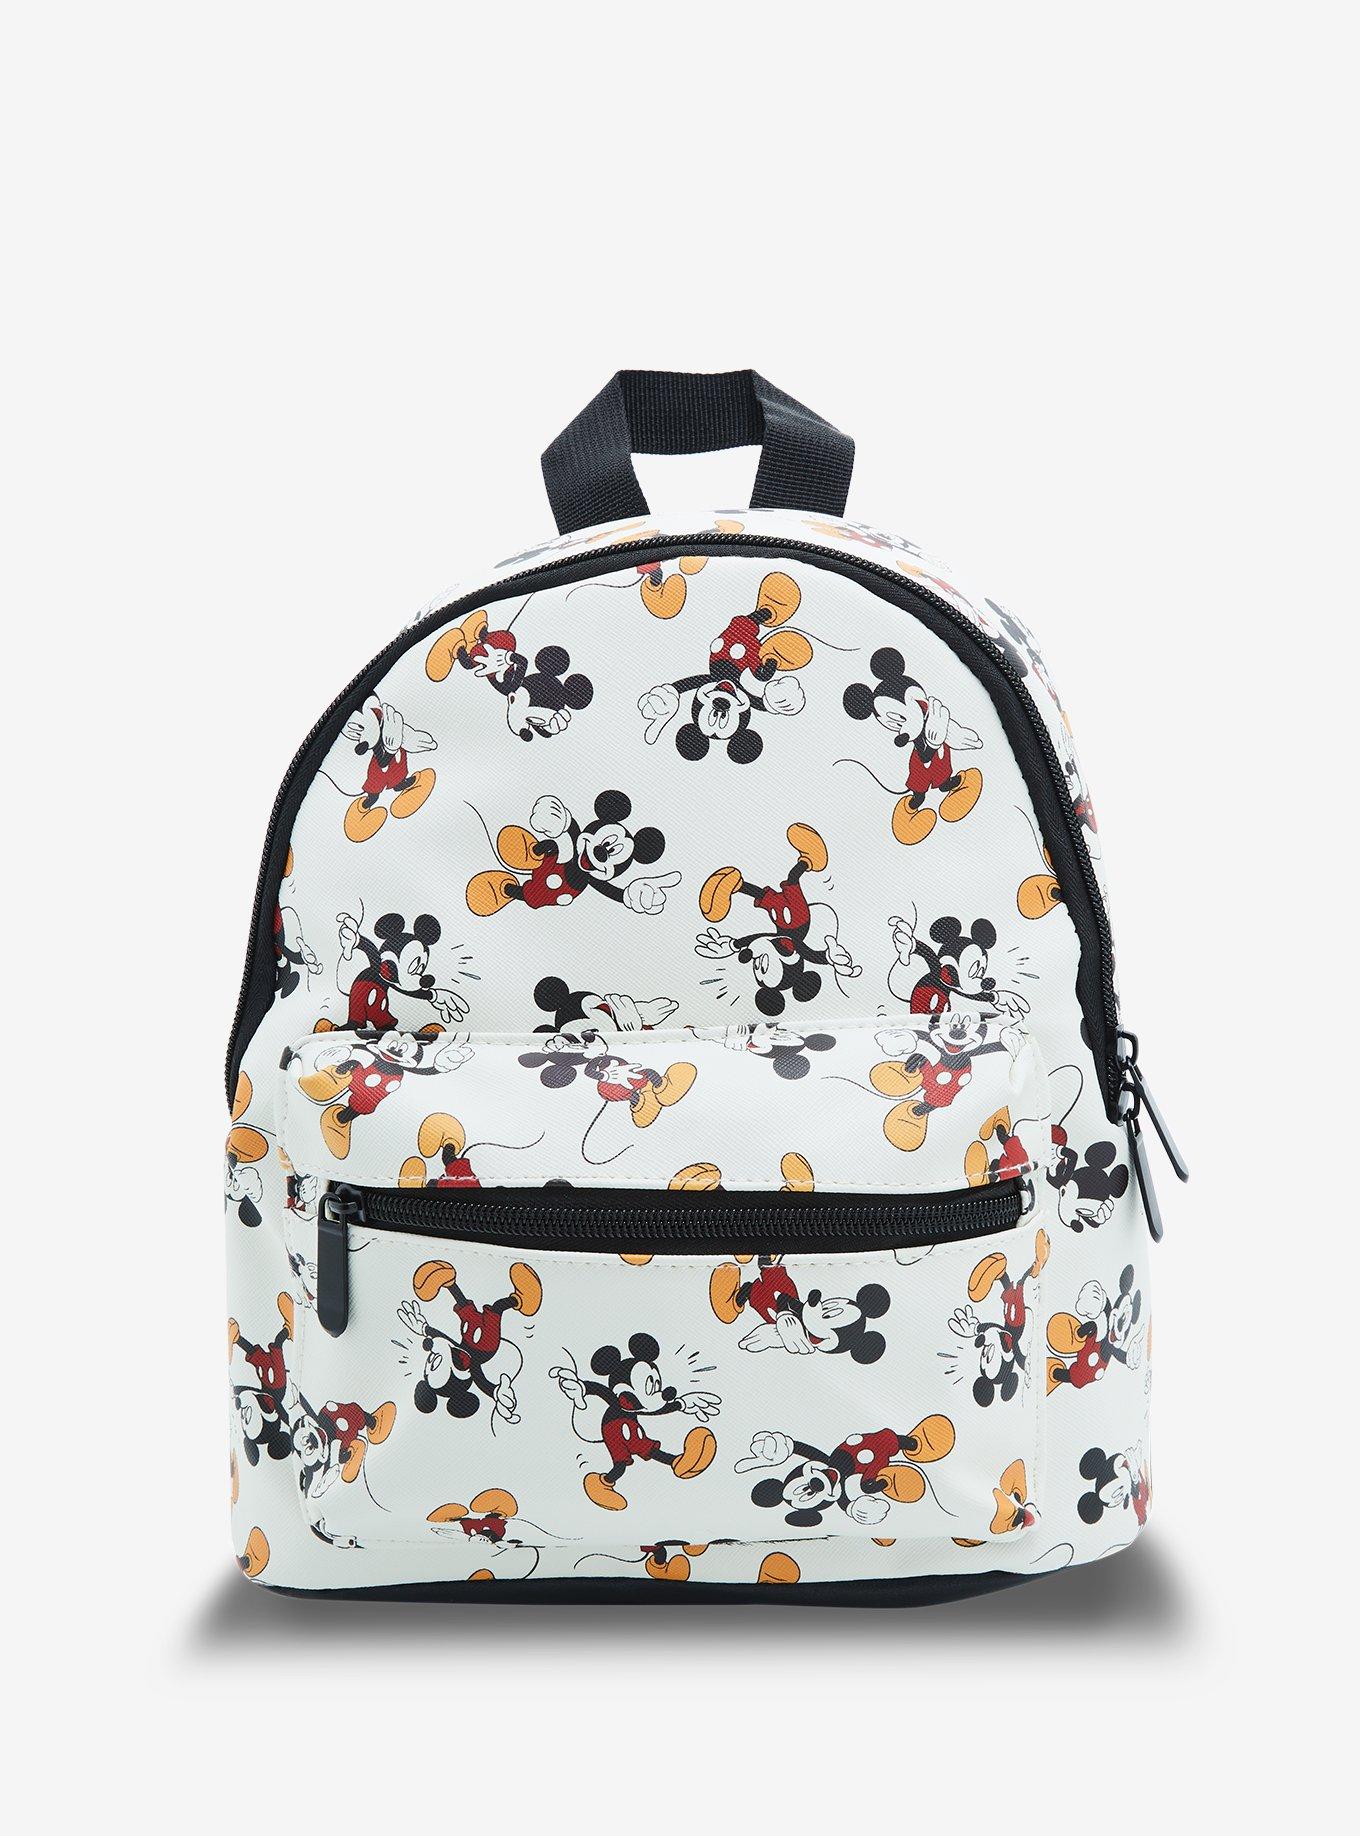 Disney's Classic Mickey Mouse Backpack